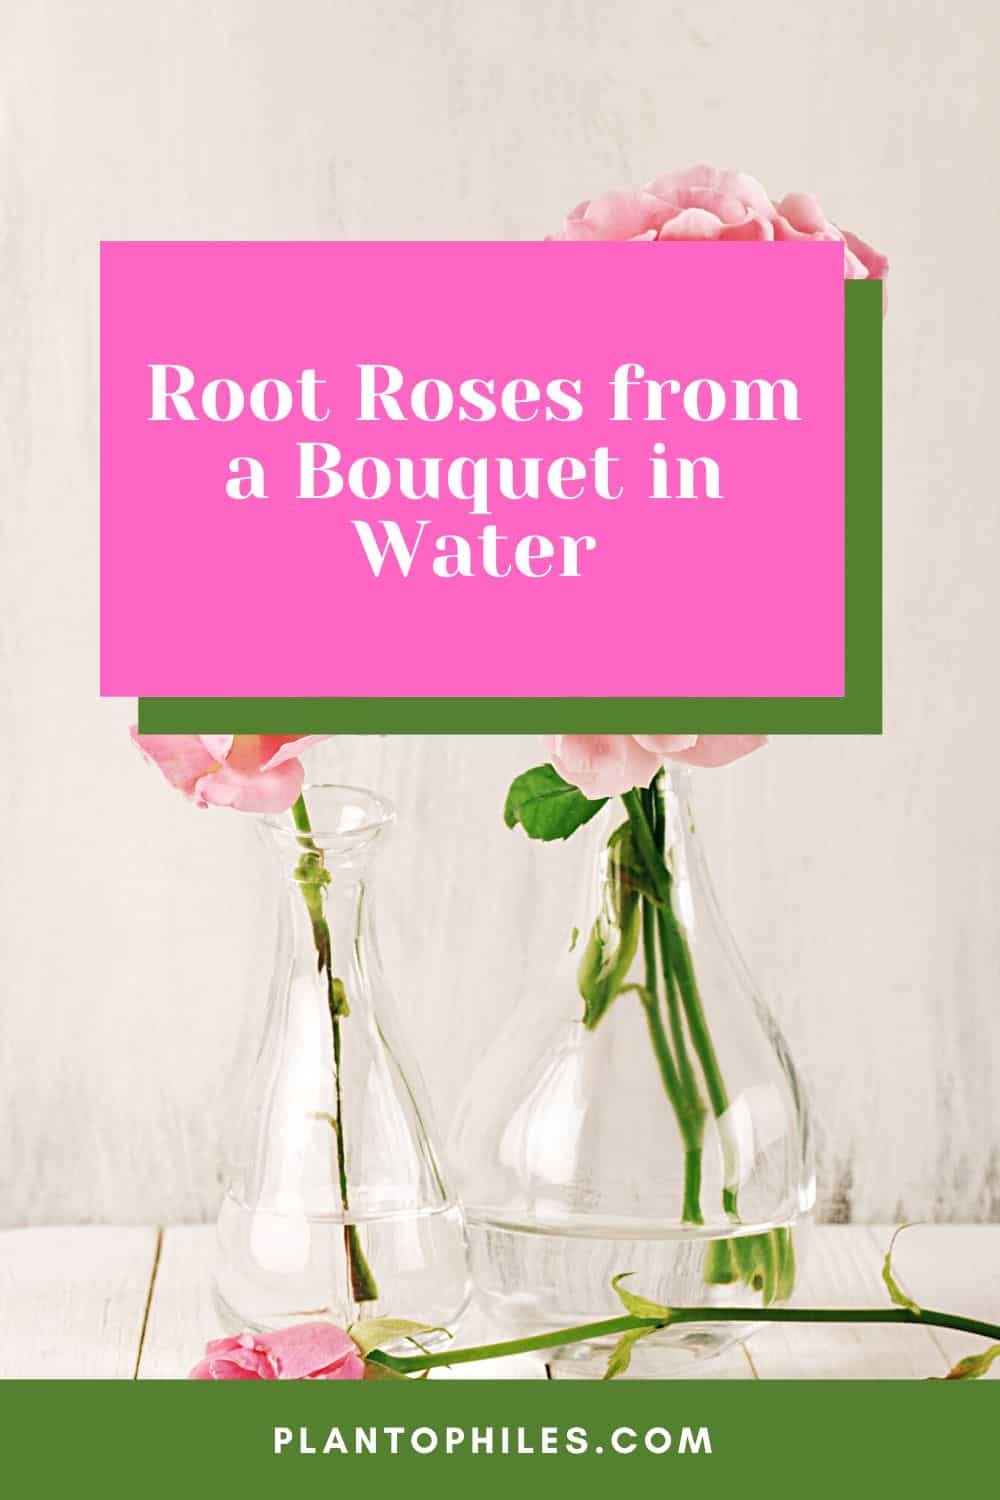 Root Roses from a Bouquet in Water